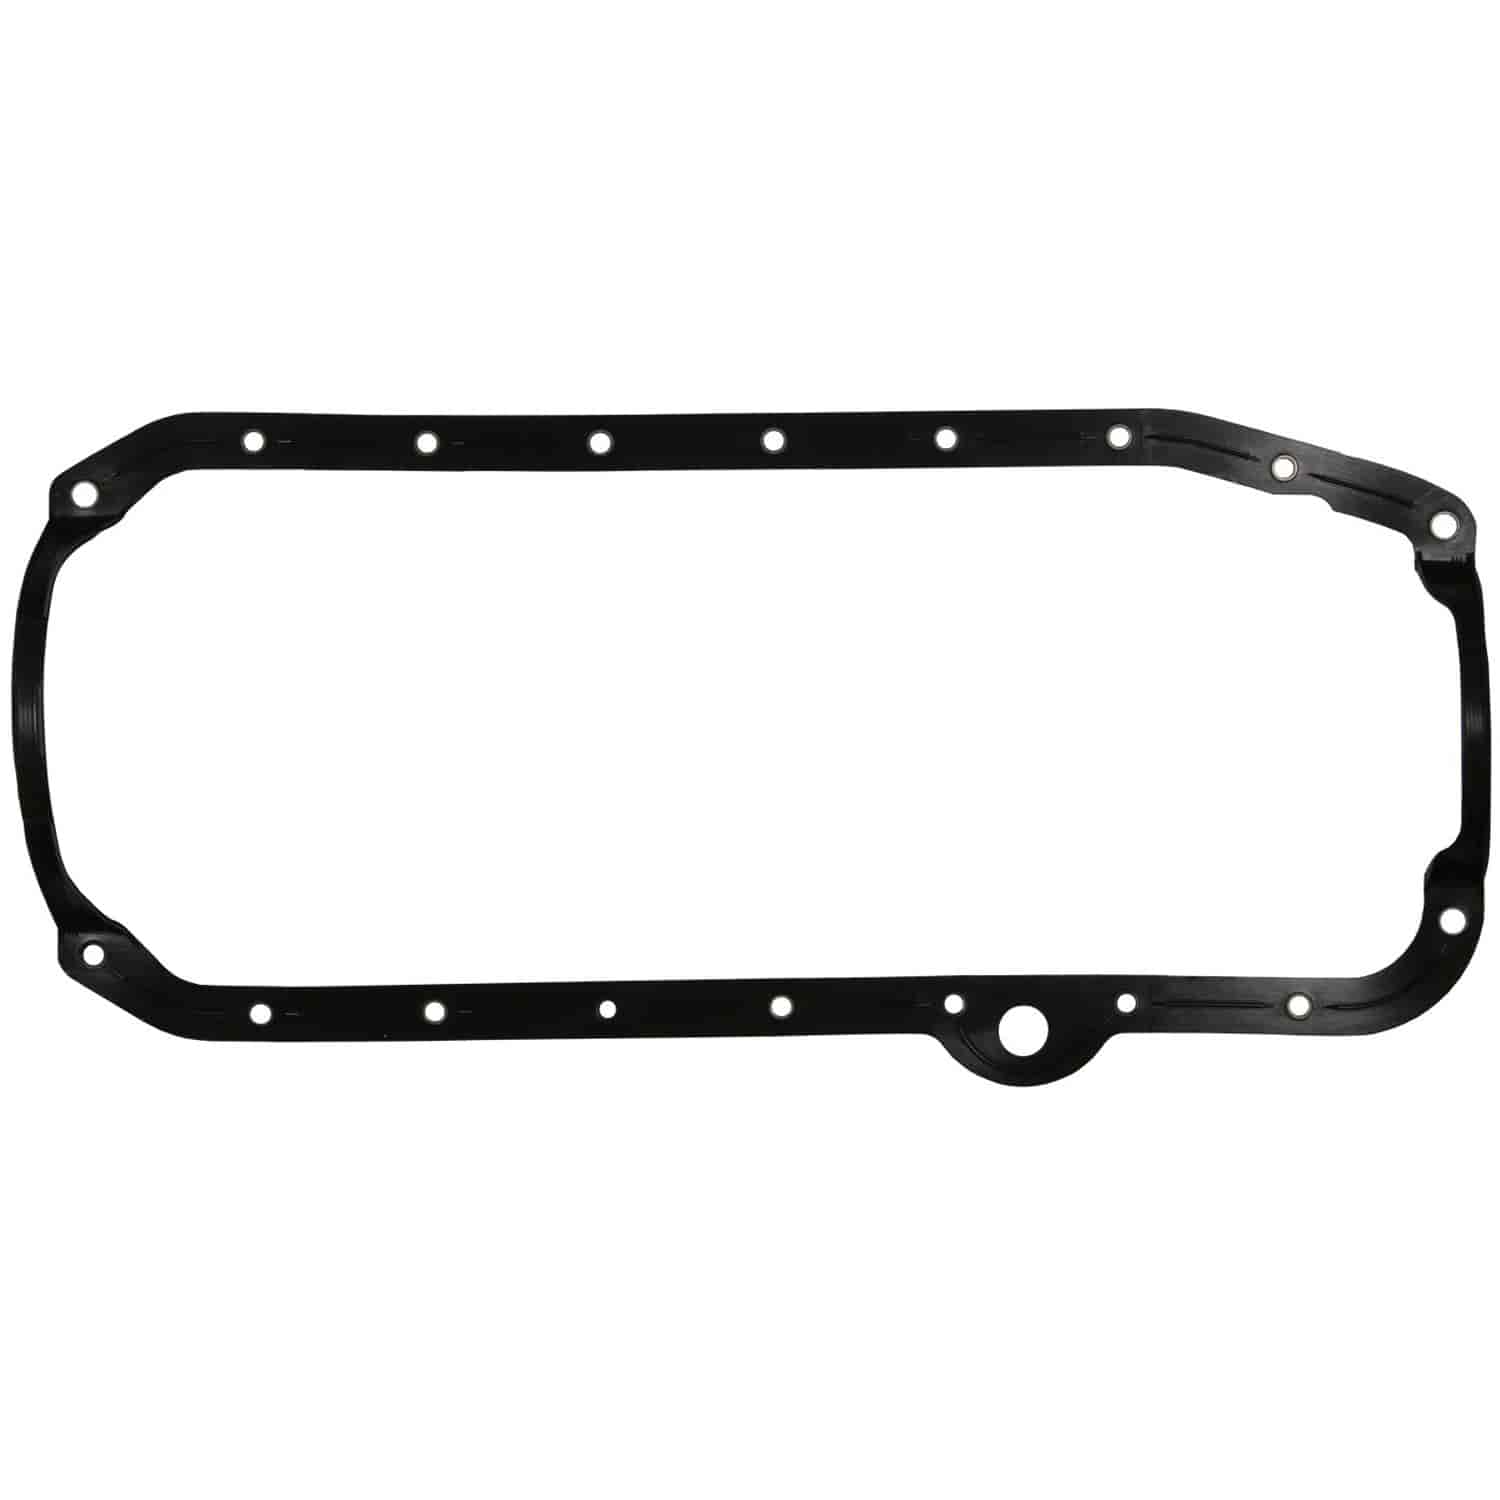 Oil Pan Gasket Set 1980-1985 Small Block Chevy 267/305/350 (4.4/5.0/5.7L) Right Hand Dipstick in Molded Rubber